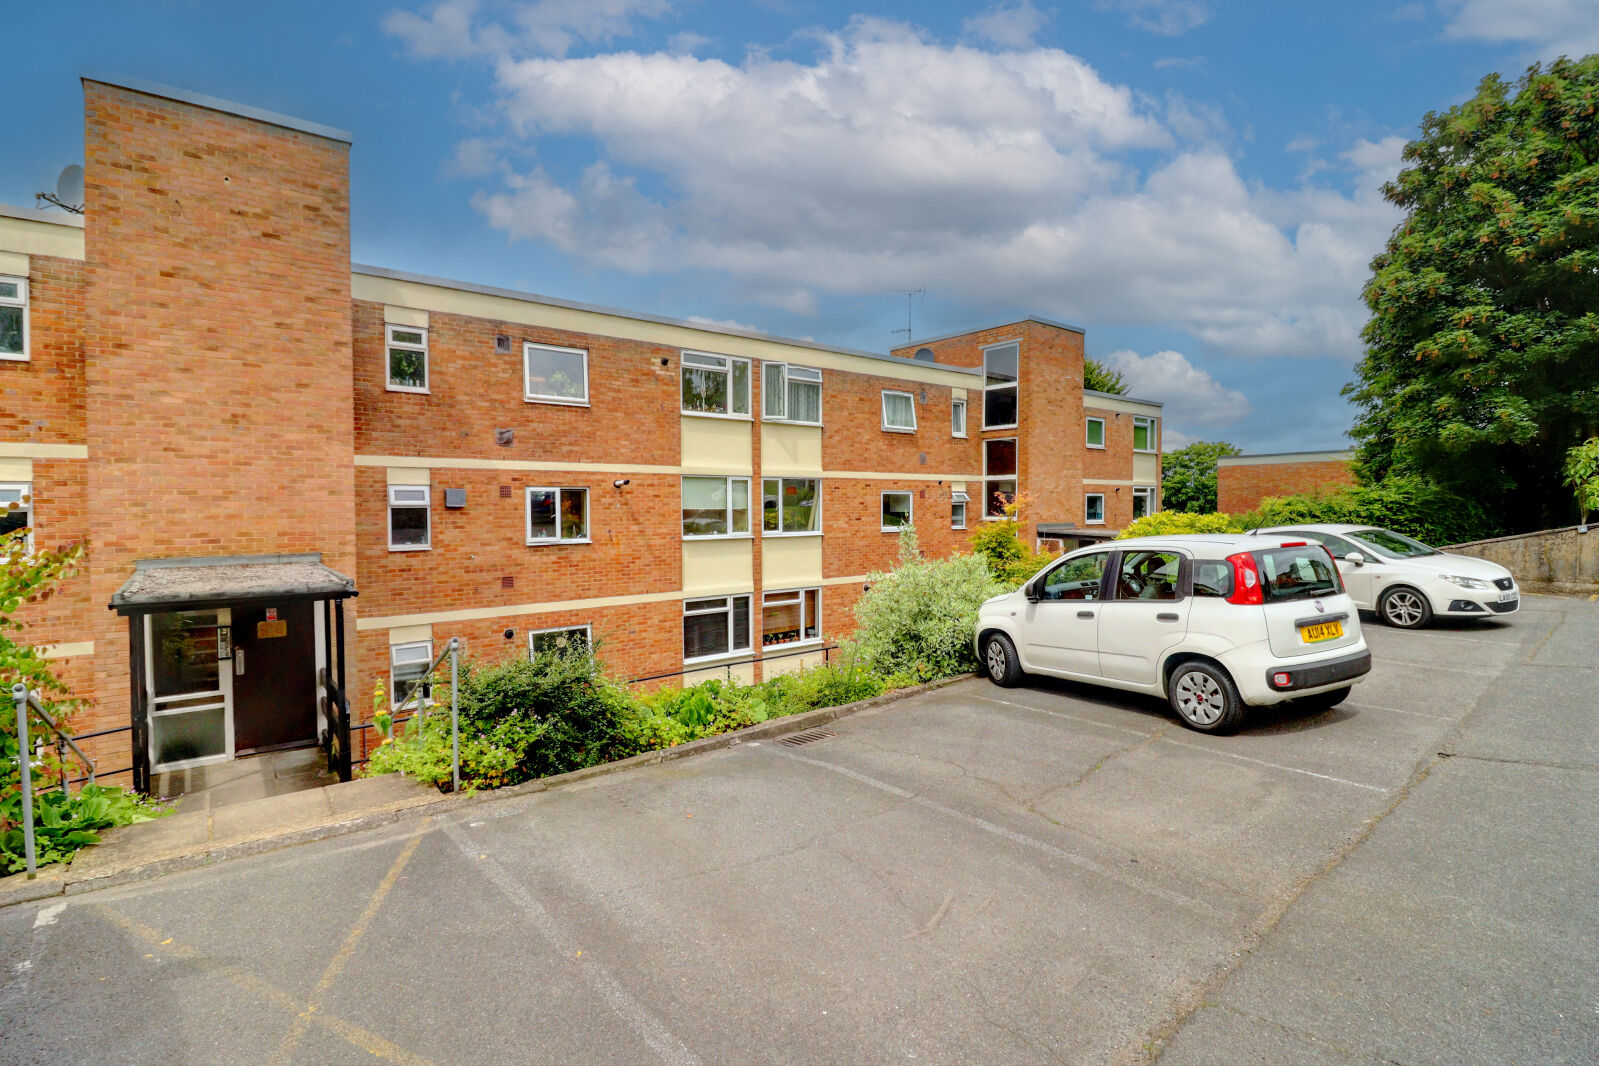 2 bedroom  flat for sale Green Hill Gate, High Wycombe, HP13, main image